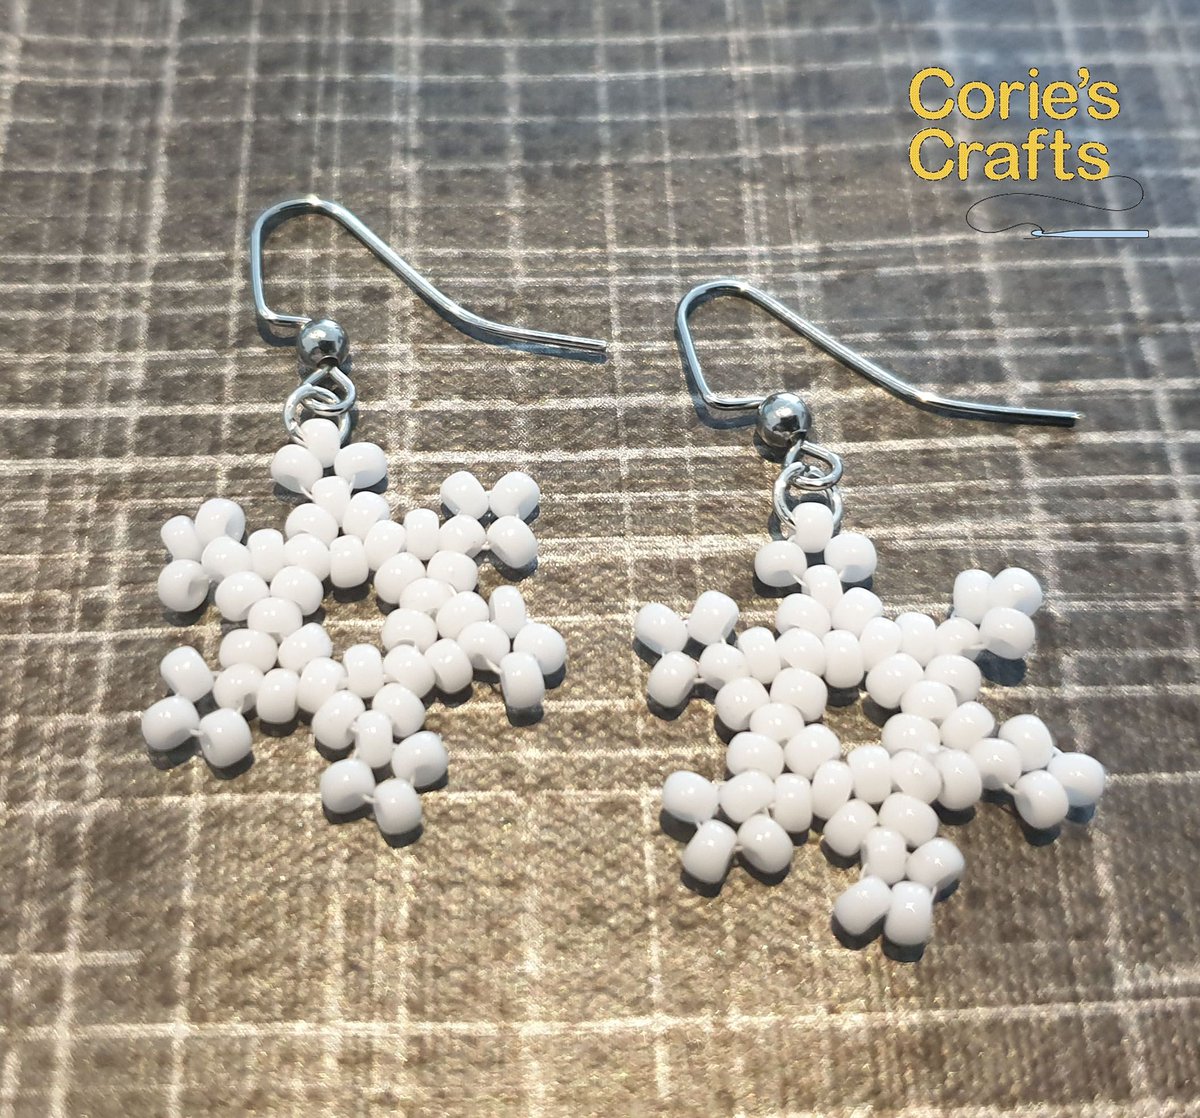 Corie's Crafts friends, family, and fans almost winter sale! Get these adorable snowflake earrings for only $10 including shipping! This deal is NOT available on Etsy- you must message me in order to cash in. Sale ends Nov 1, so message me today! #coriescrafts snowflakeearrings